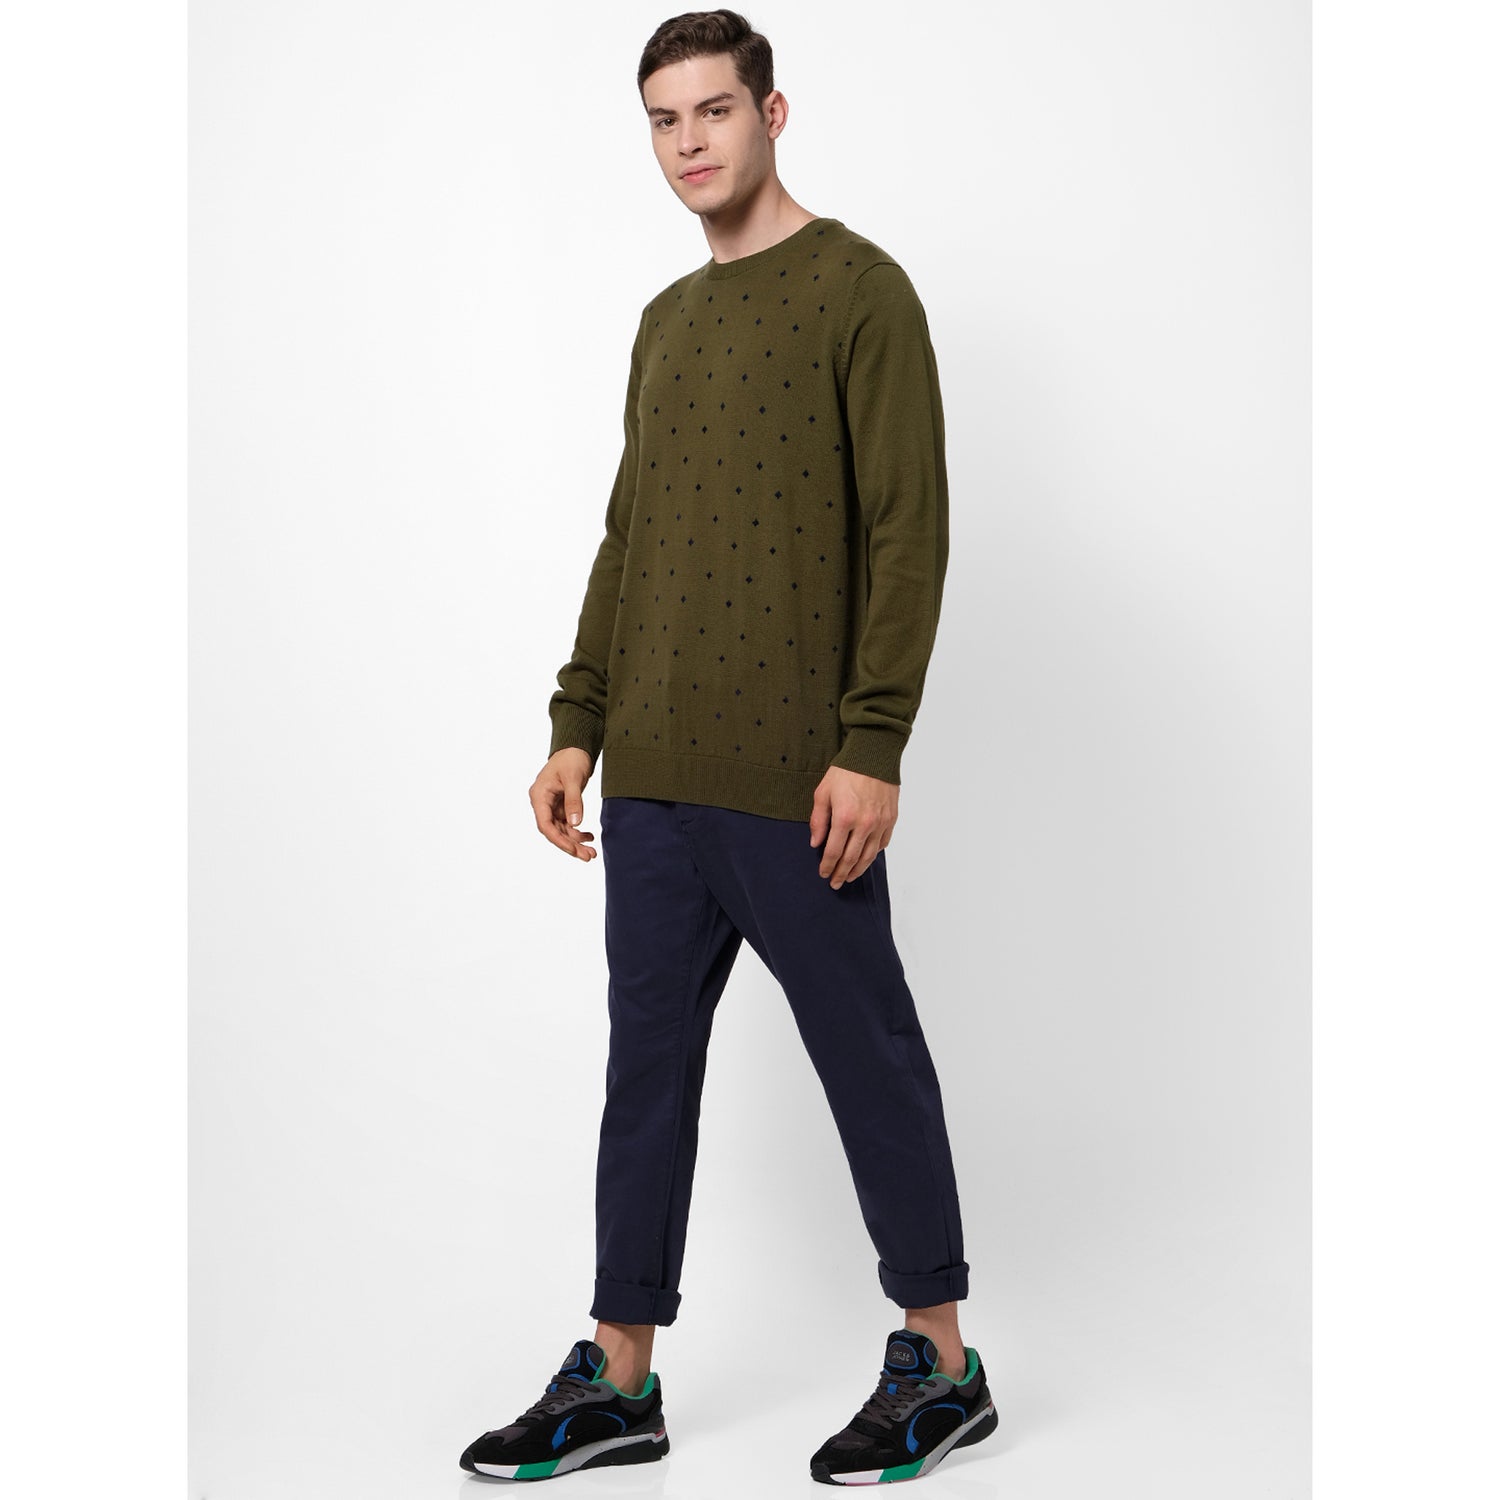 Olive Green Printed Pullover Sweater (SEFLOCK)